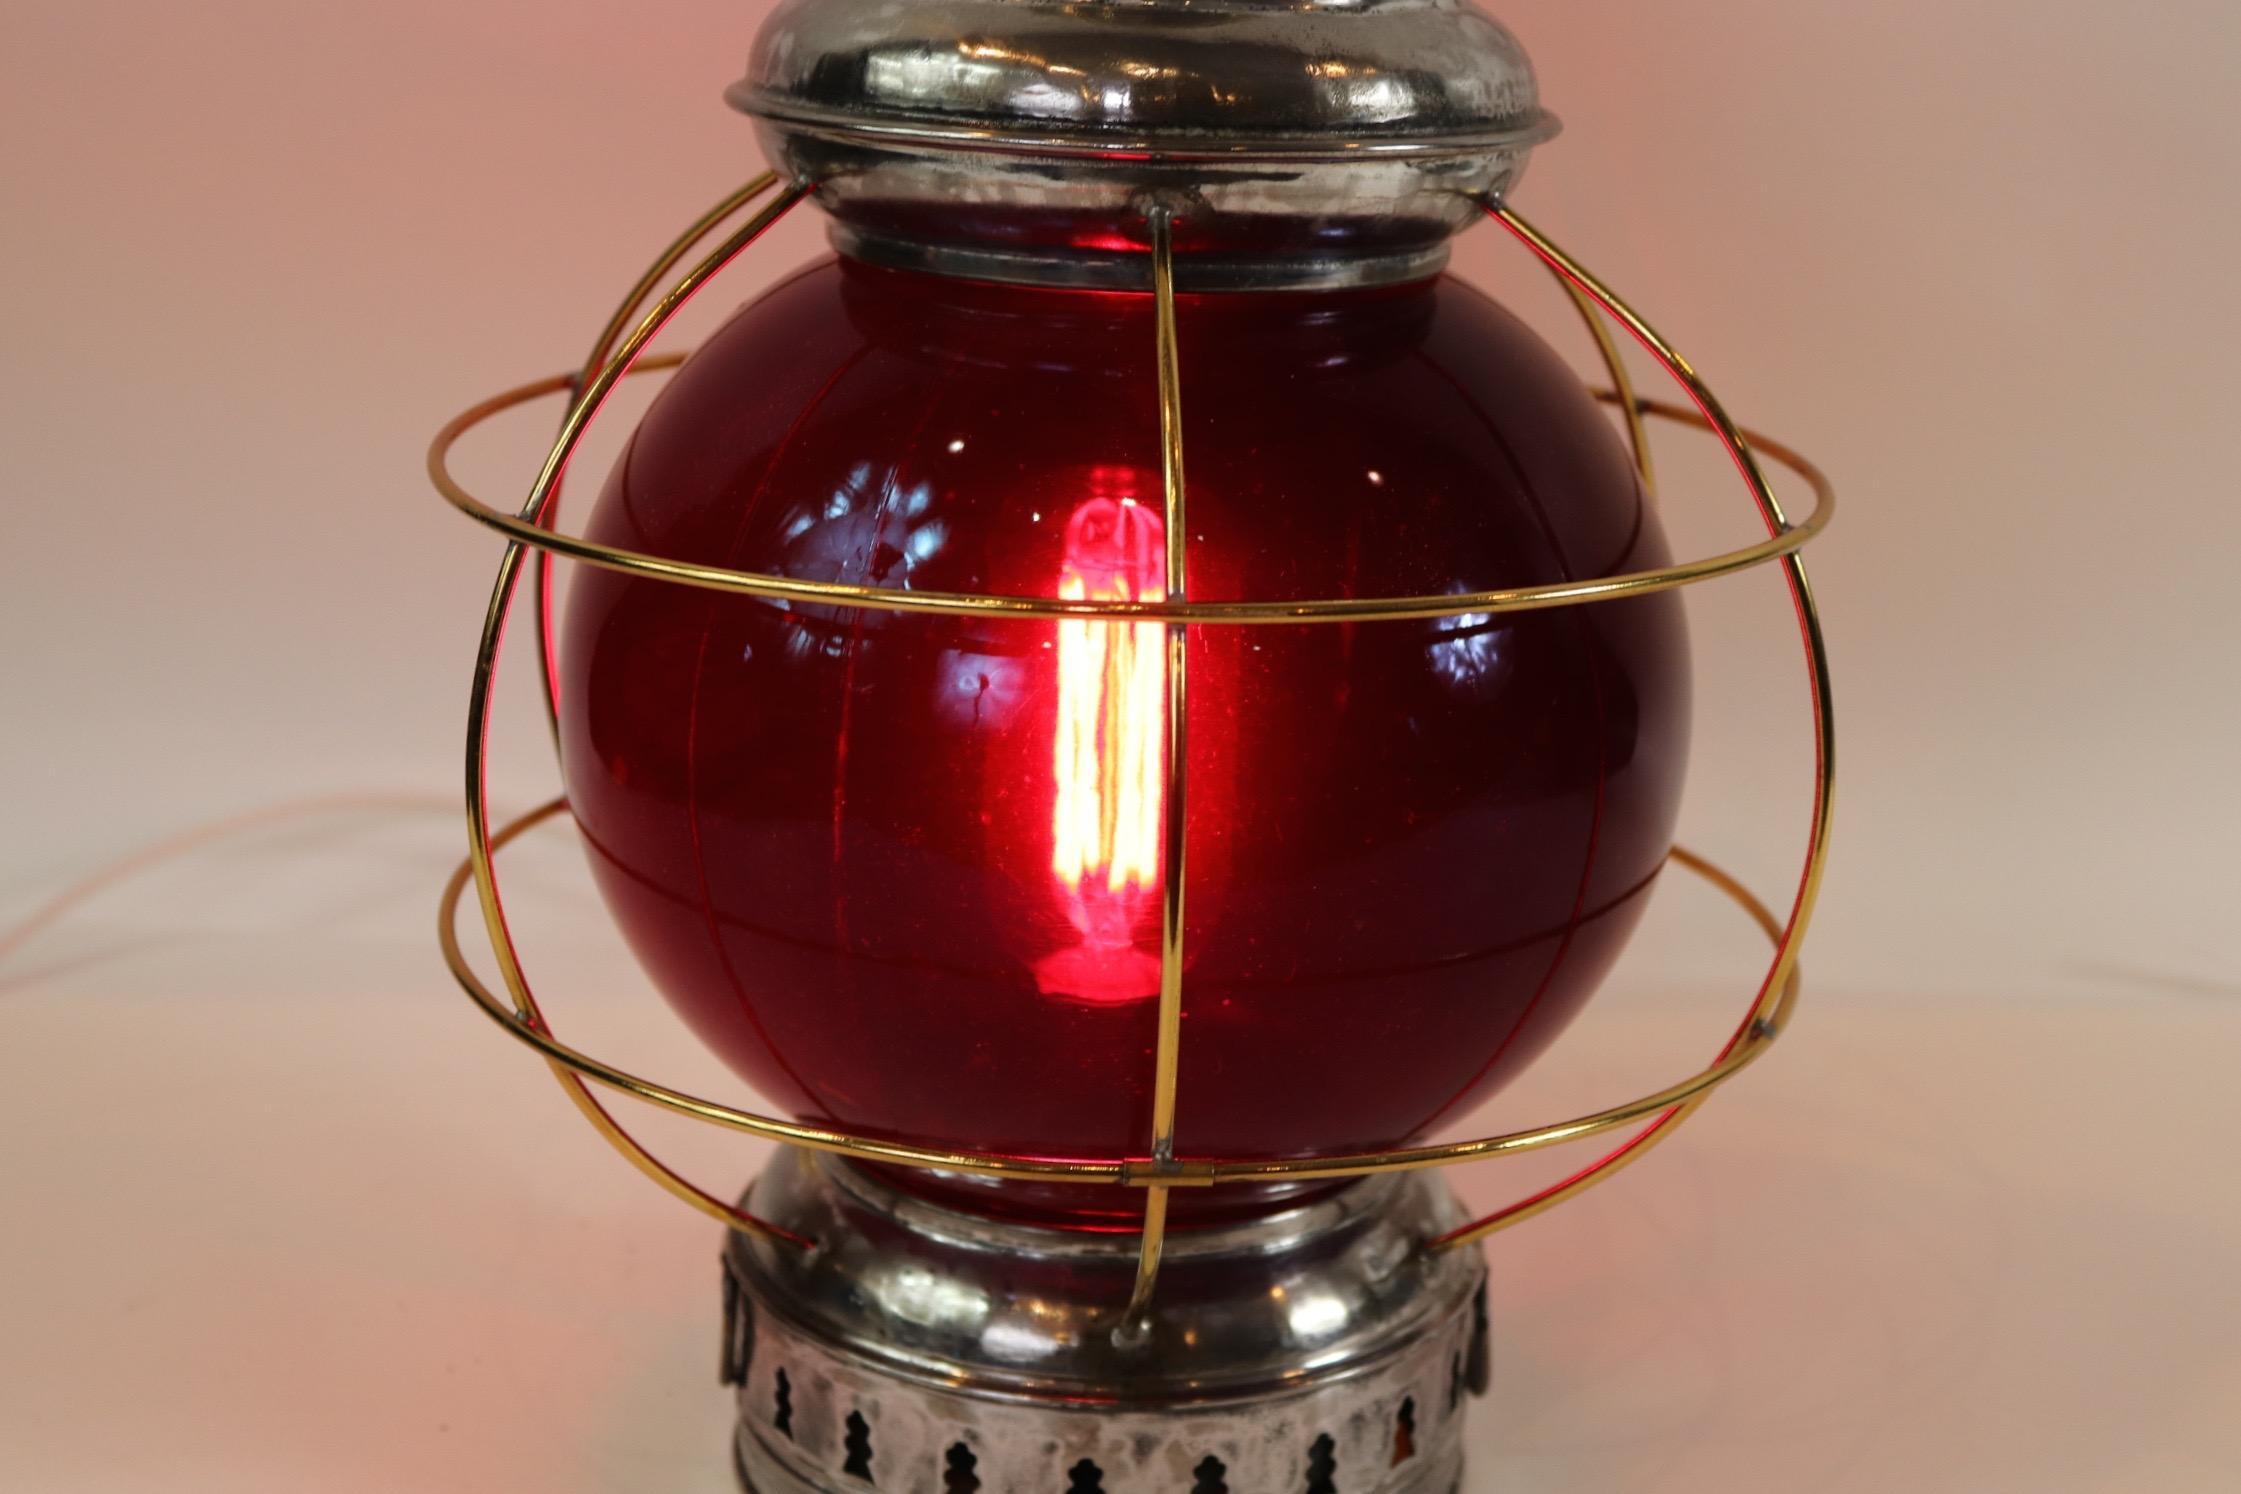 Ship's polished and lacquered onion lantern with protective brass bars, ruby red lens, new socket and wired for home display.

Overall dimensions: Weight is 6 pounds. 18